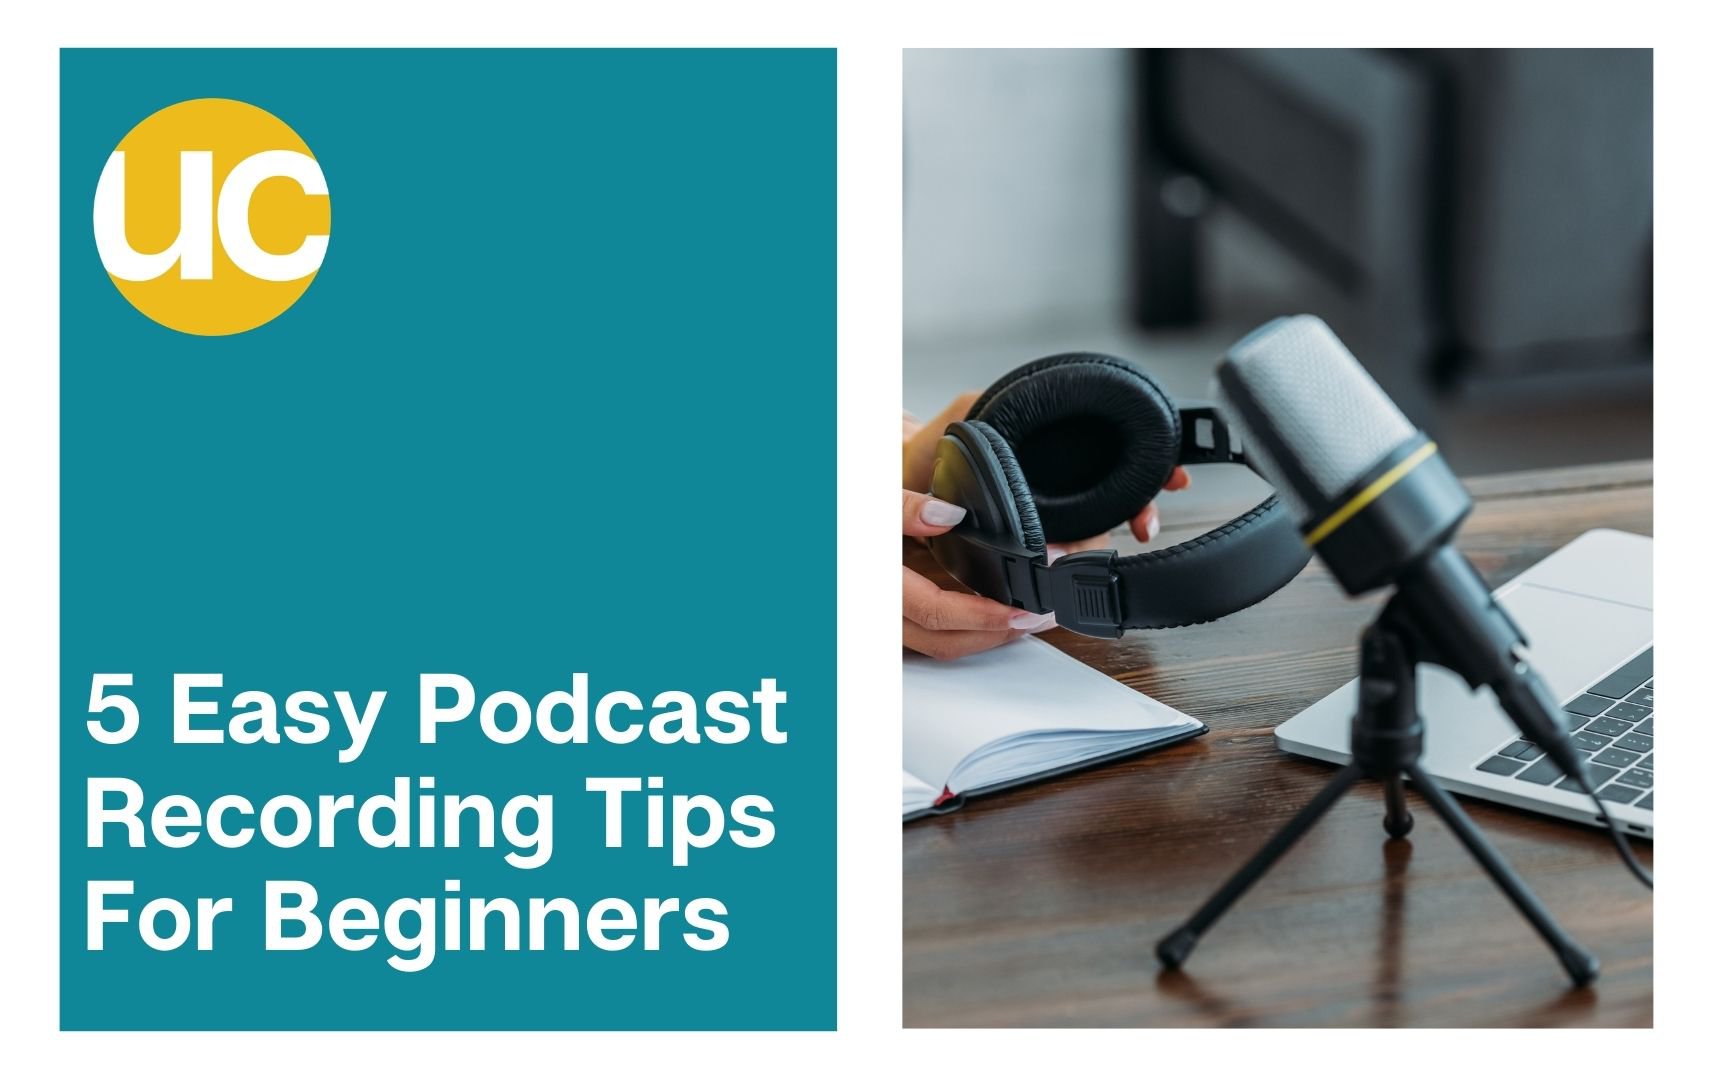 Woman holding headphones sitting at desk in front of microphone - text below reads “5 easy podcast recording tips for beginners” Ultimate Podcast Marketing